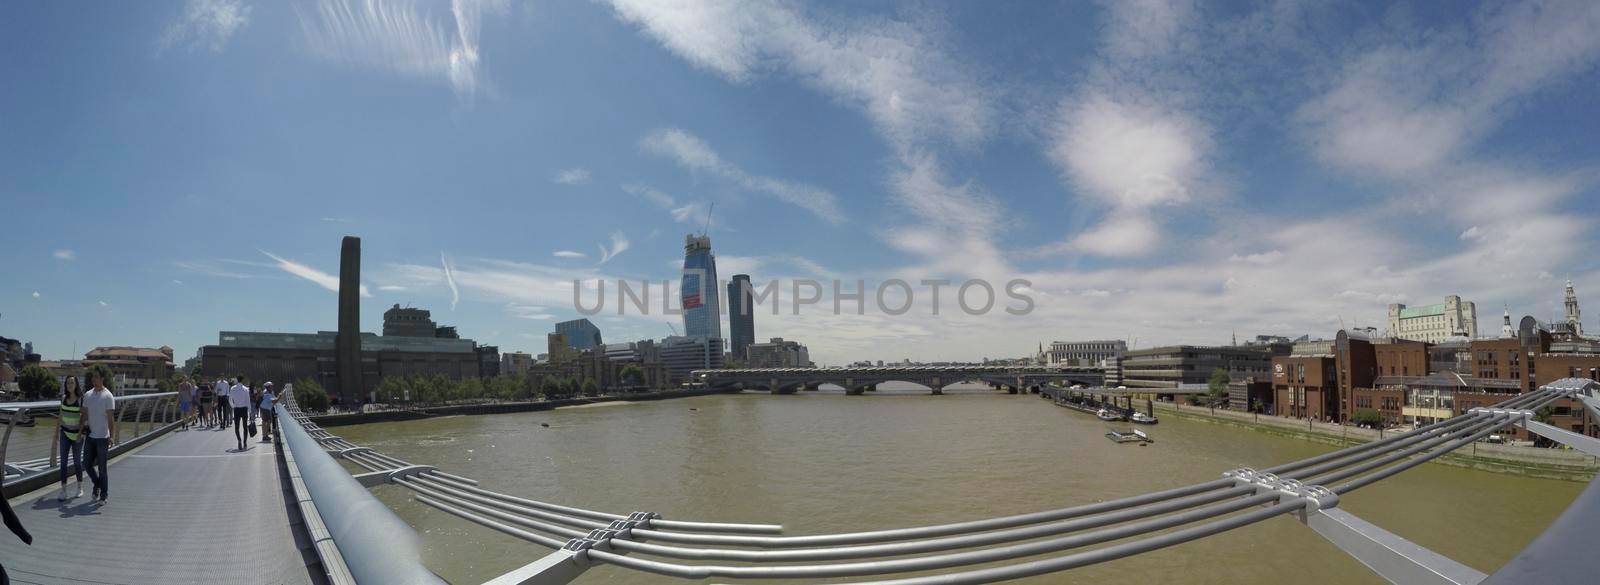 View from Millennium Bridge towards The Shard and Tower Bridge on a beautiful sunny day in London, England by zefart